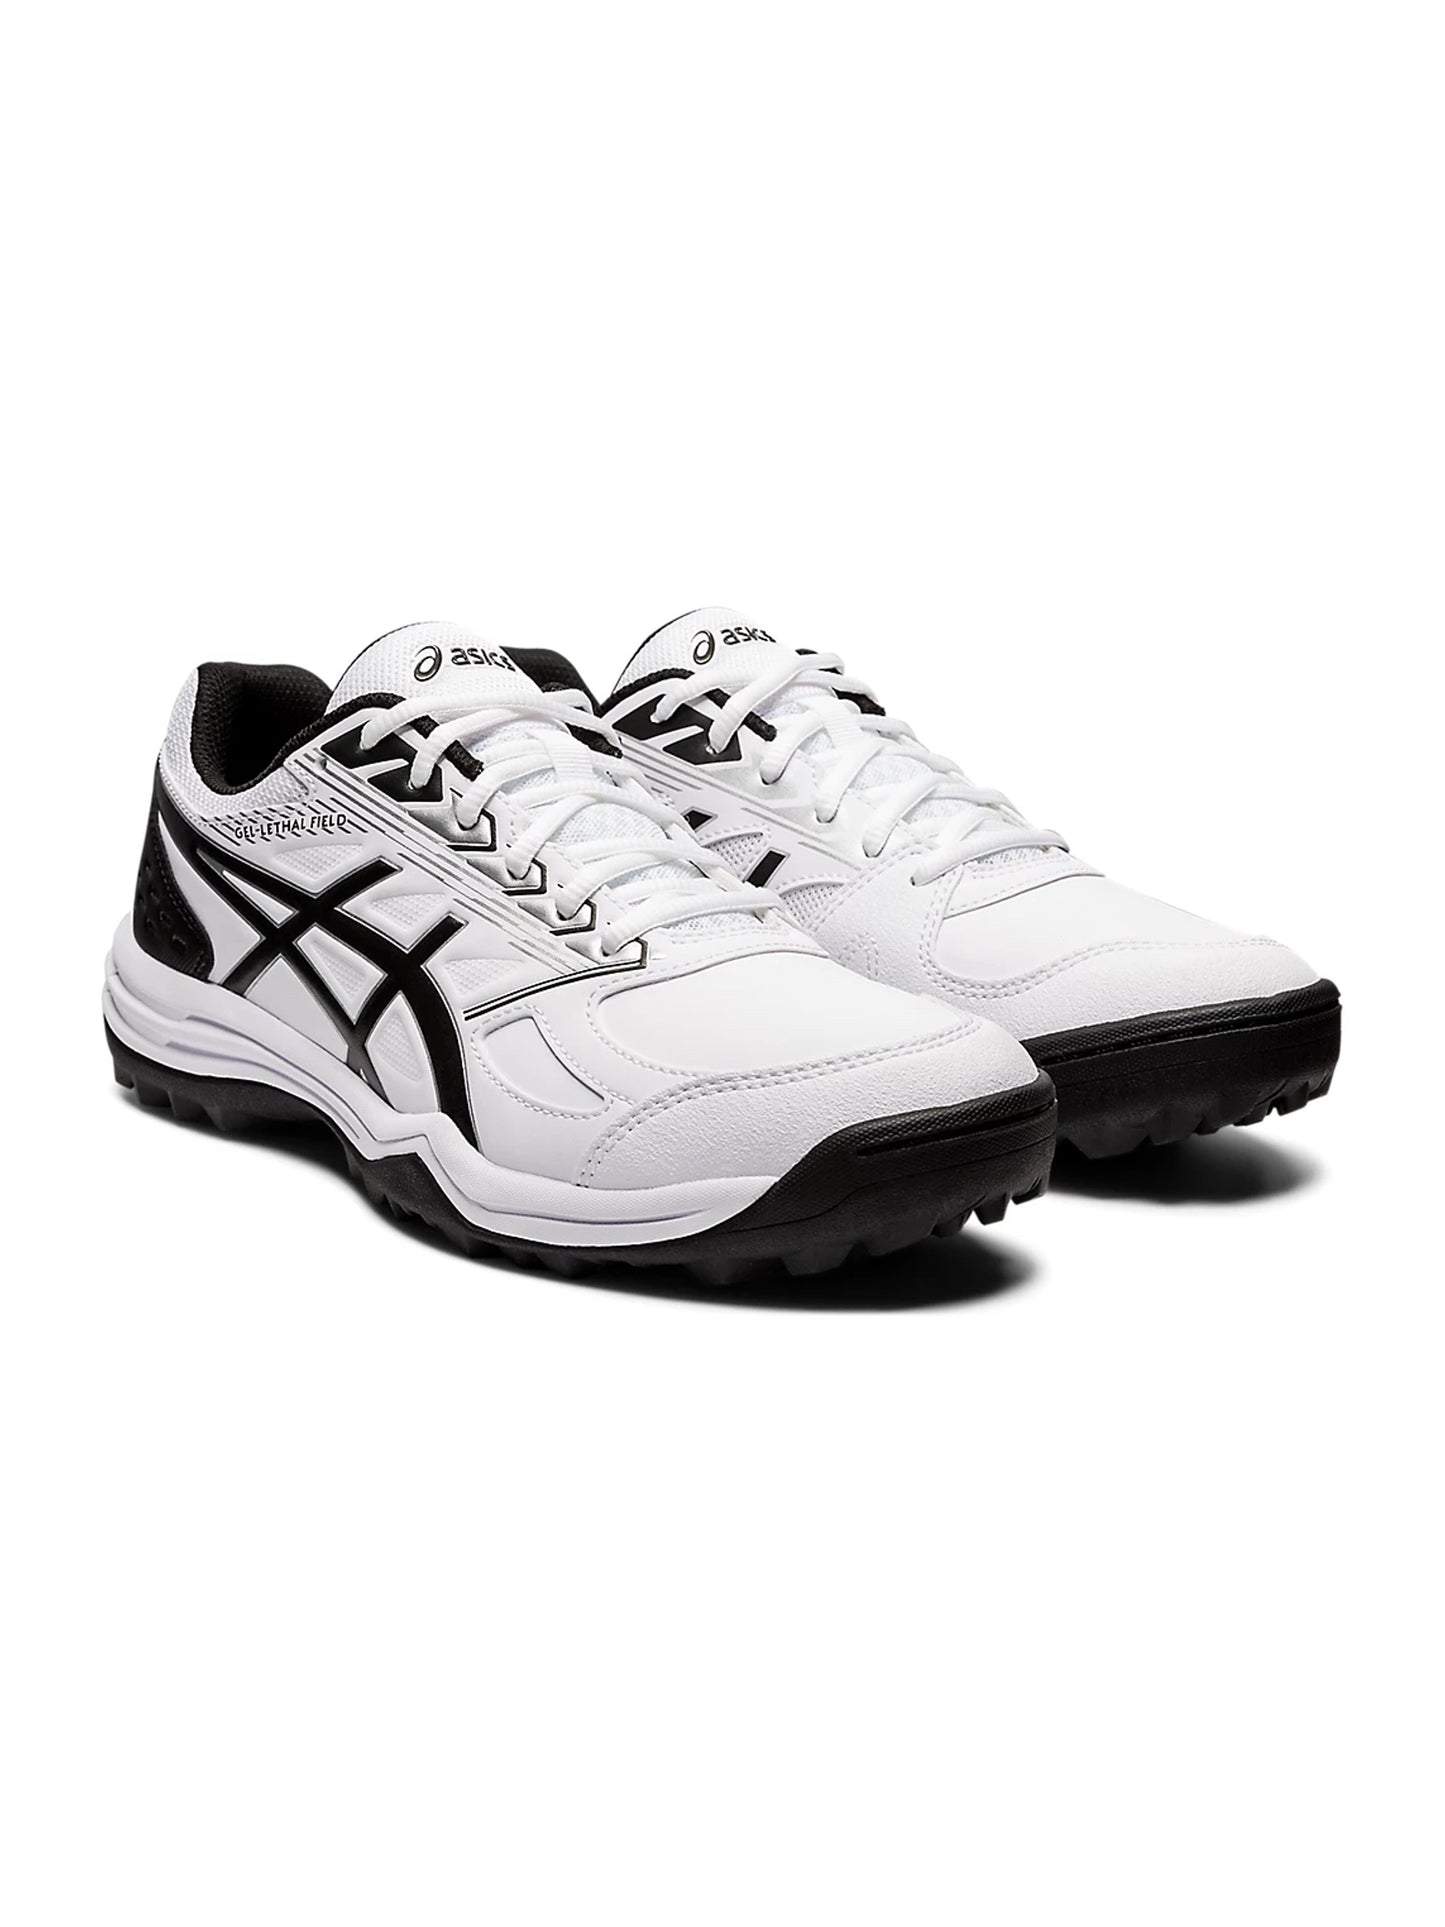 Asics Gel Lethal Field Shoes